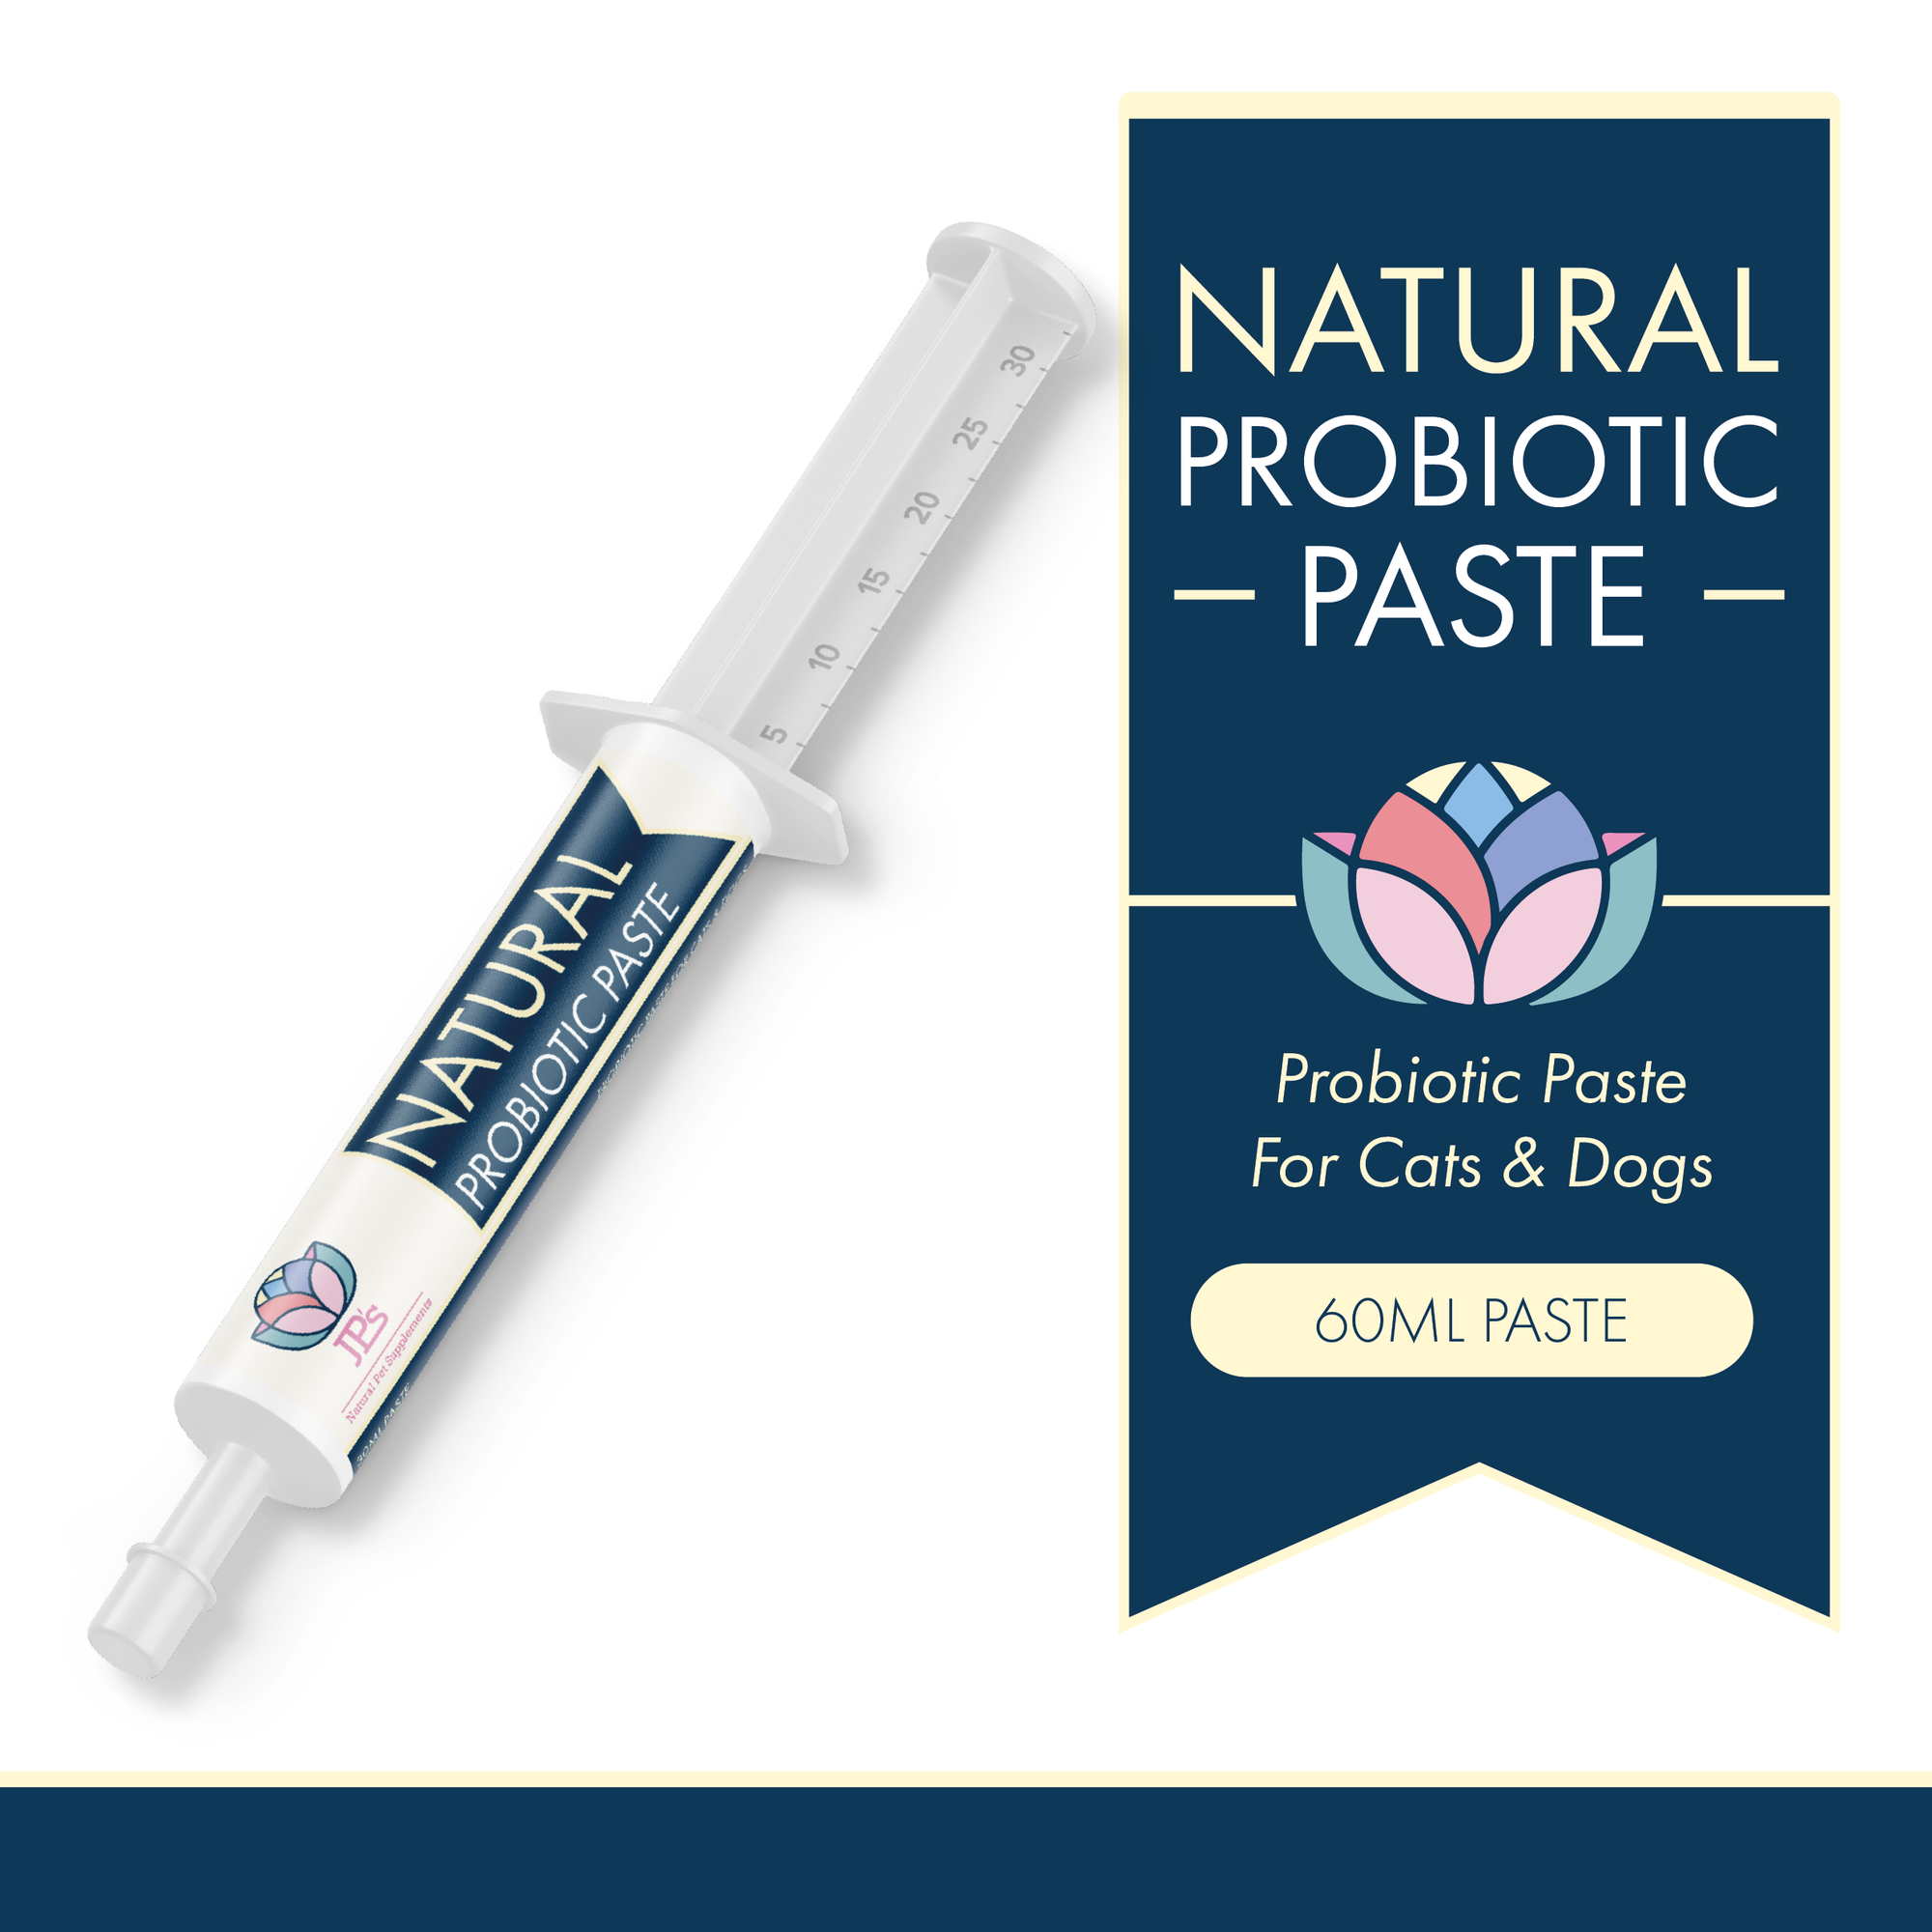 Natural probiotic paste for cats & dogs